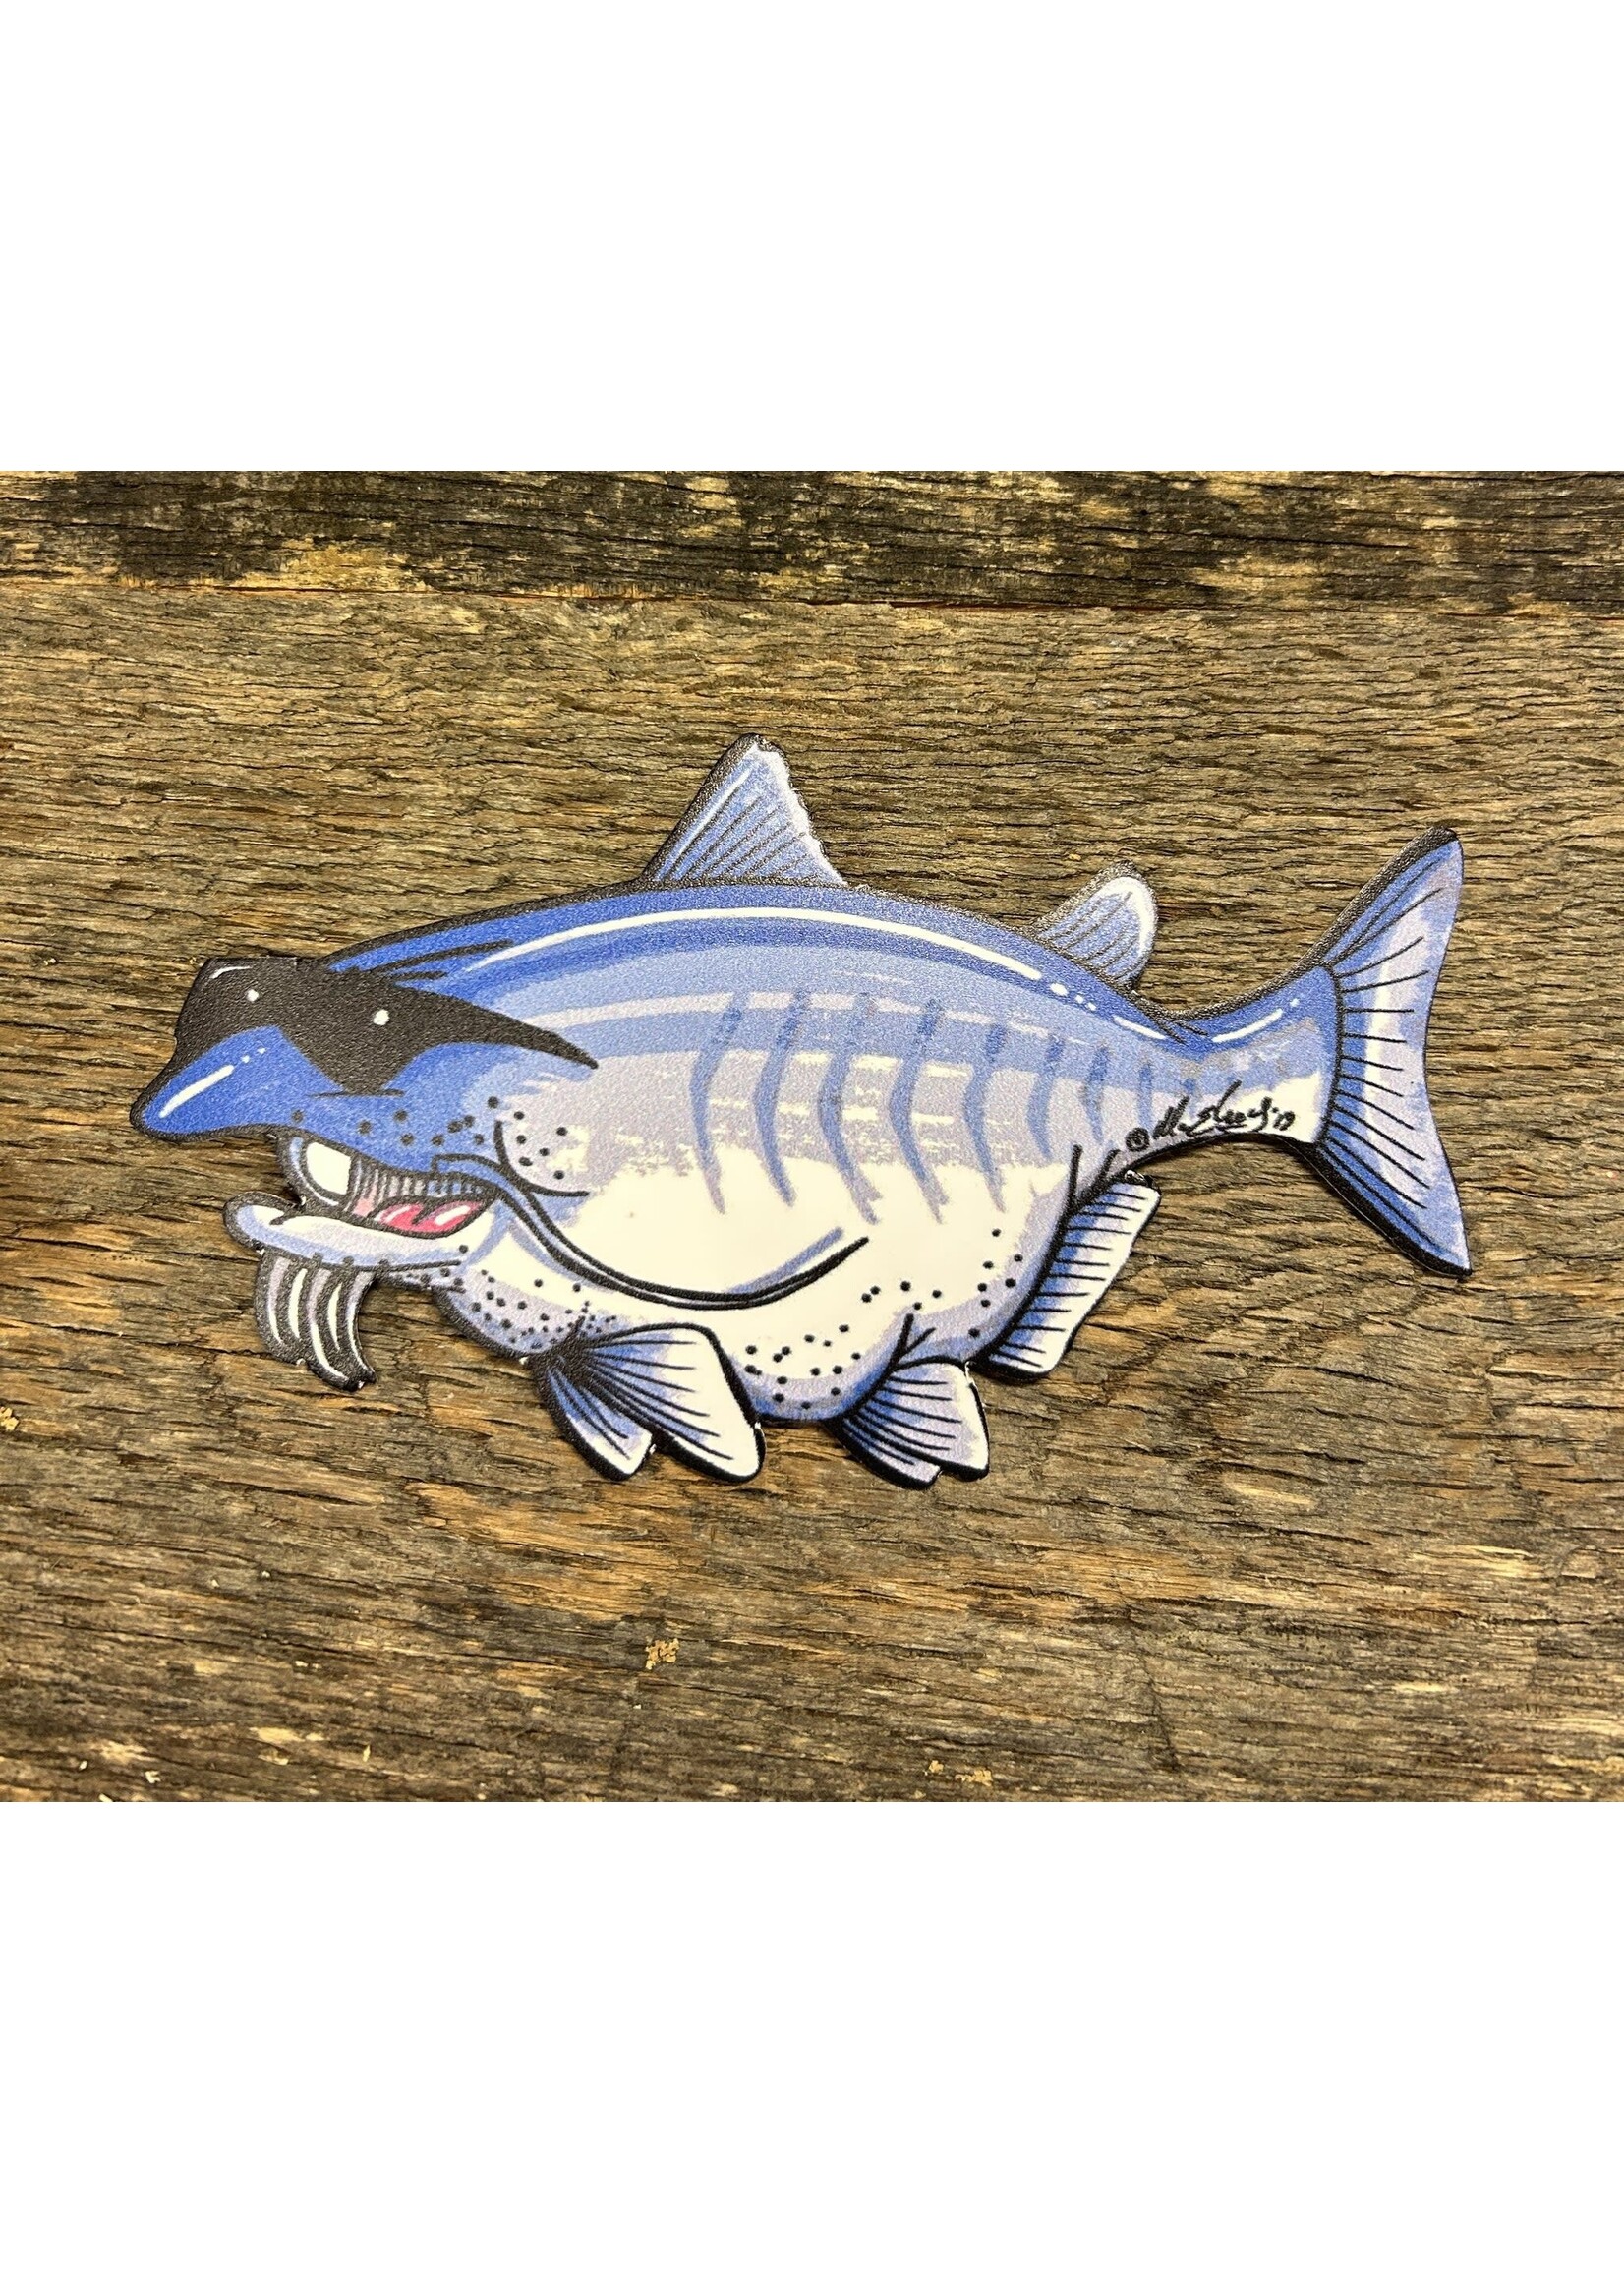 Fishing Complete Fishing Complete "Billy" the Catfish Decal